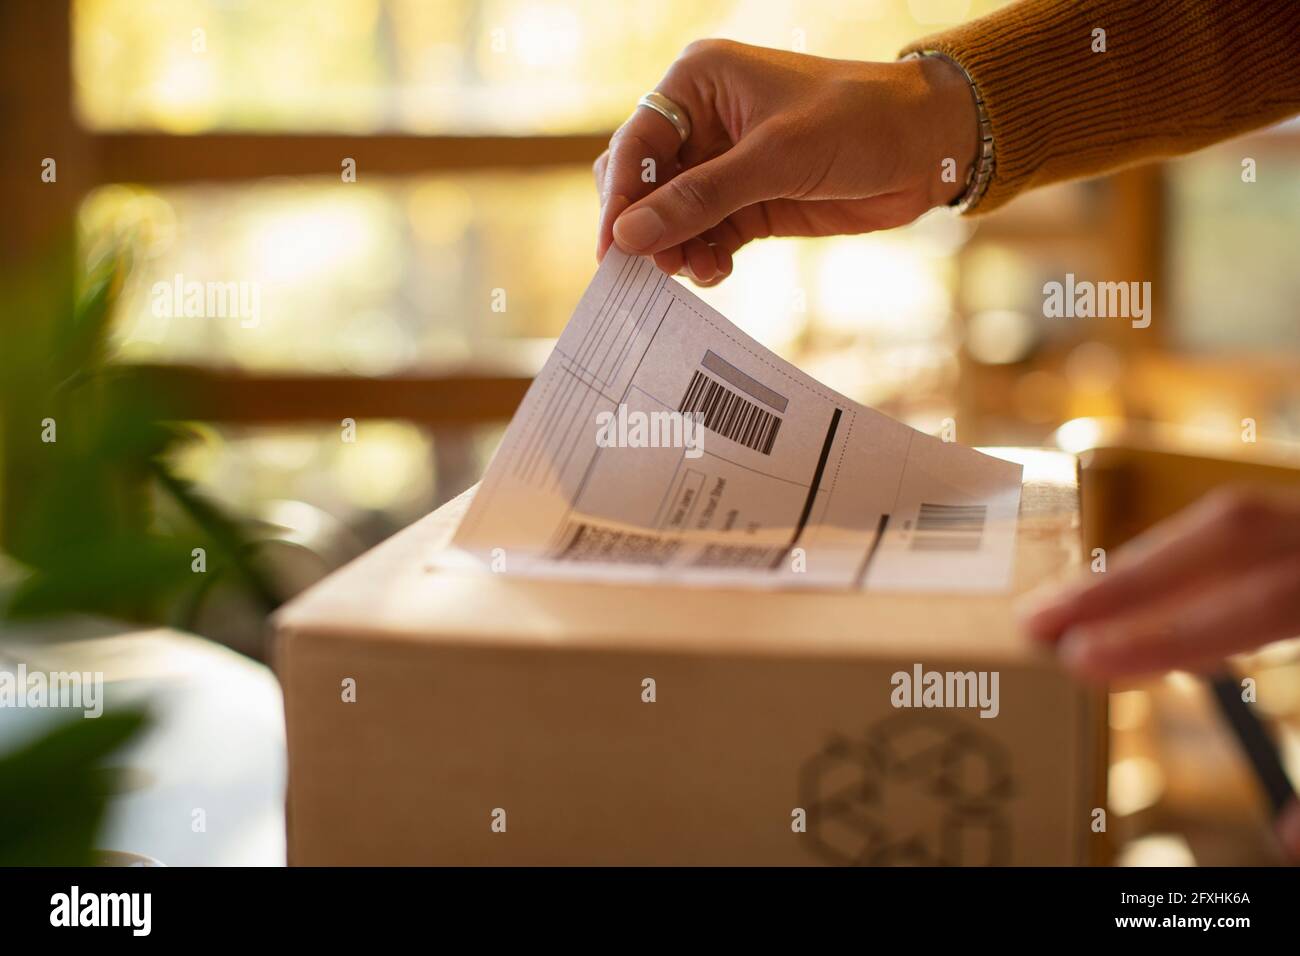 Close up business owner placing shipping label on package Stock Photo